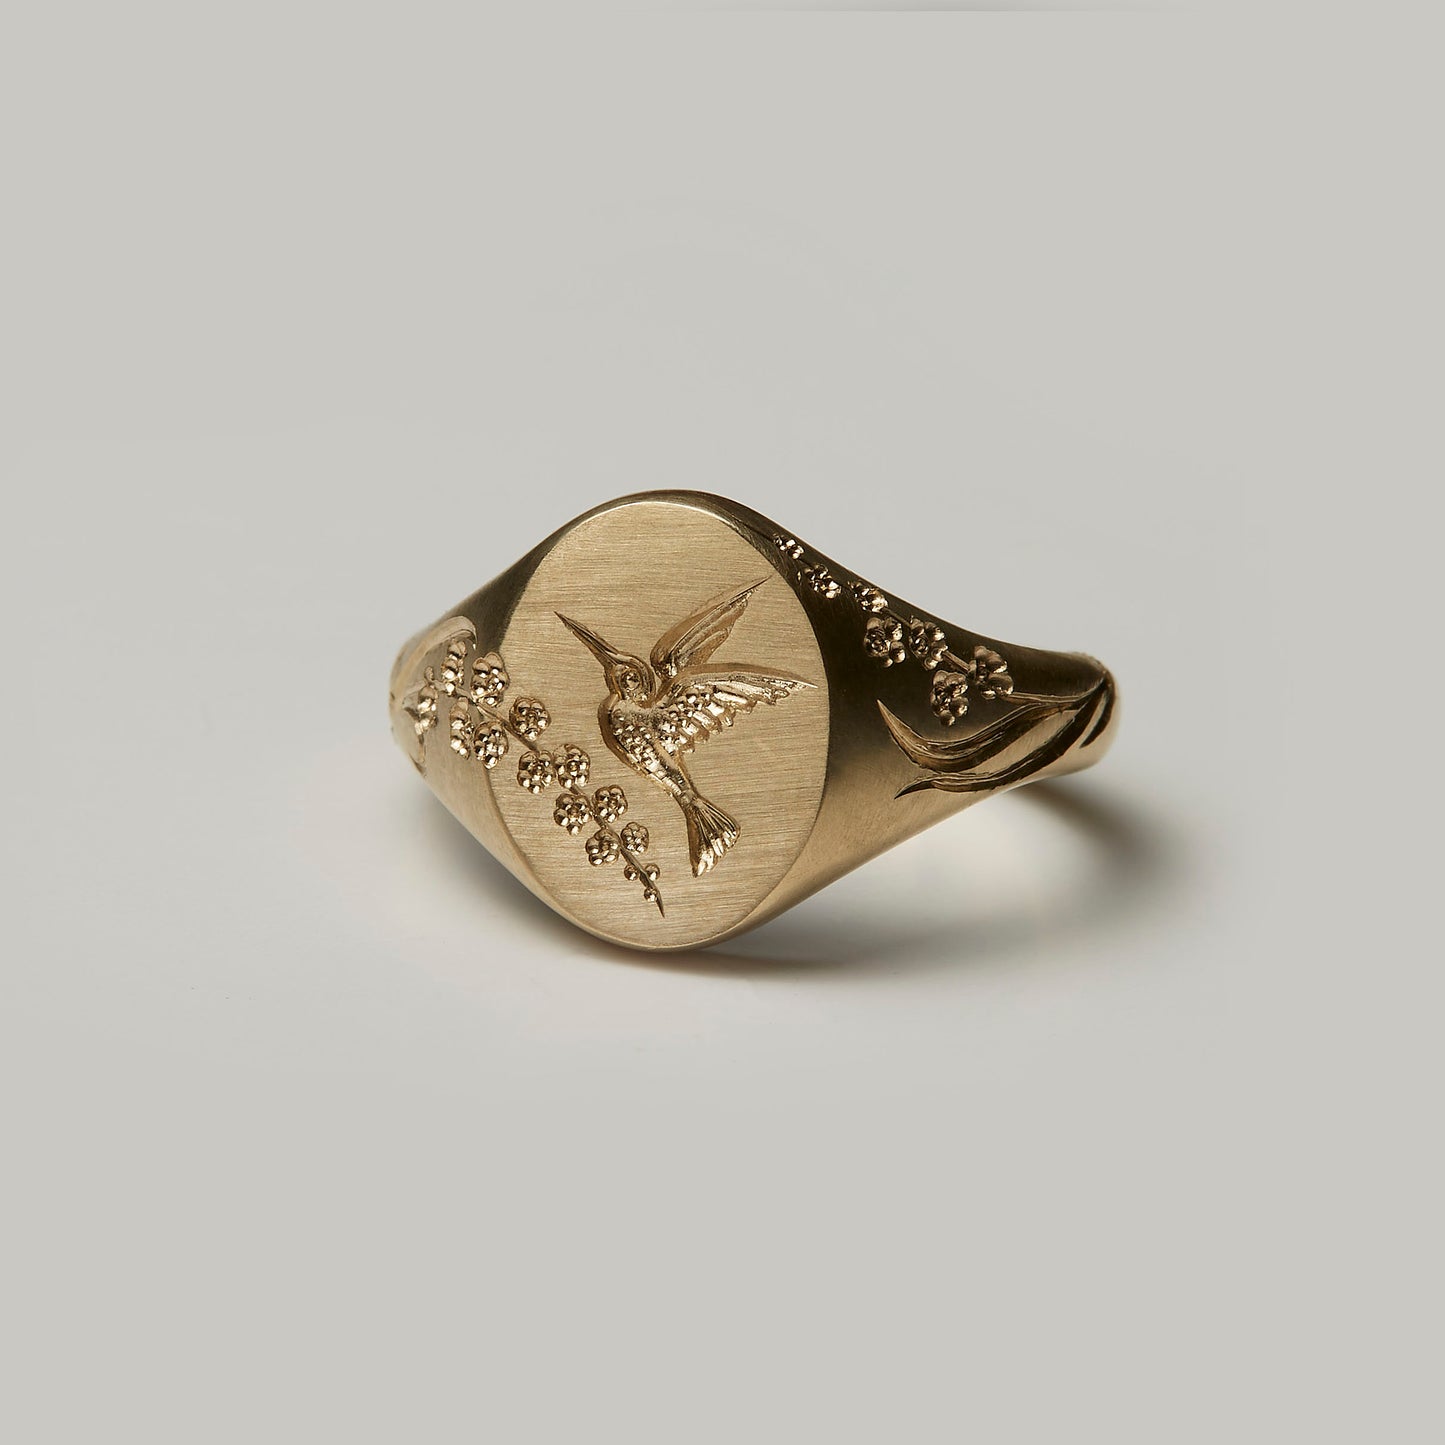 Castro Smith Jewelry Gold Hummingbird Signet Ring with Engravings in Profile View.